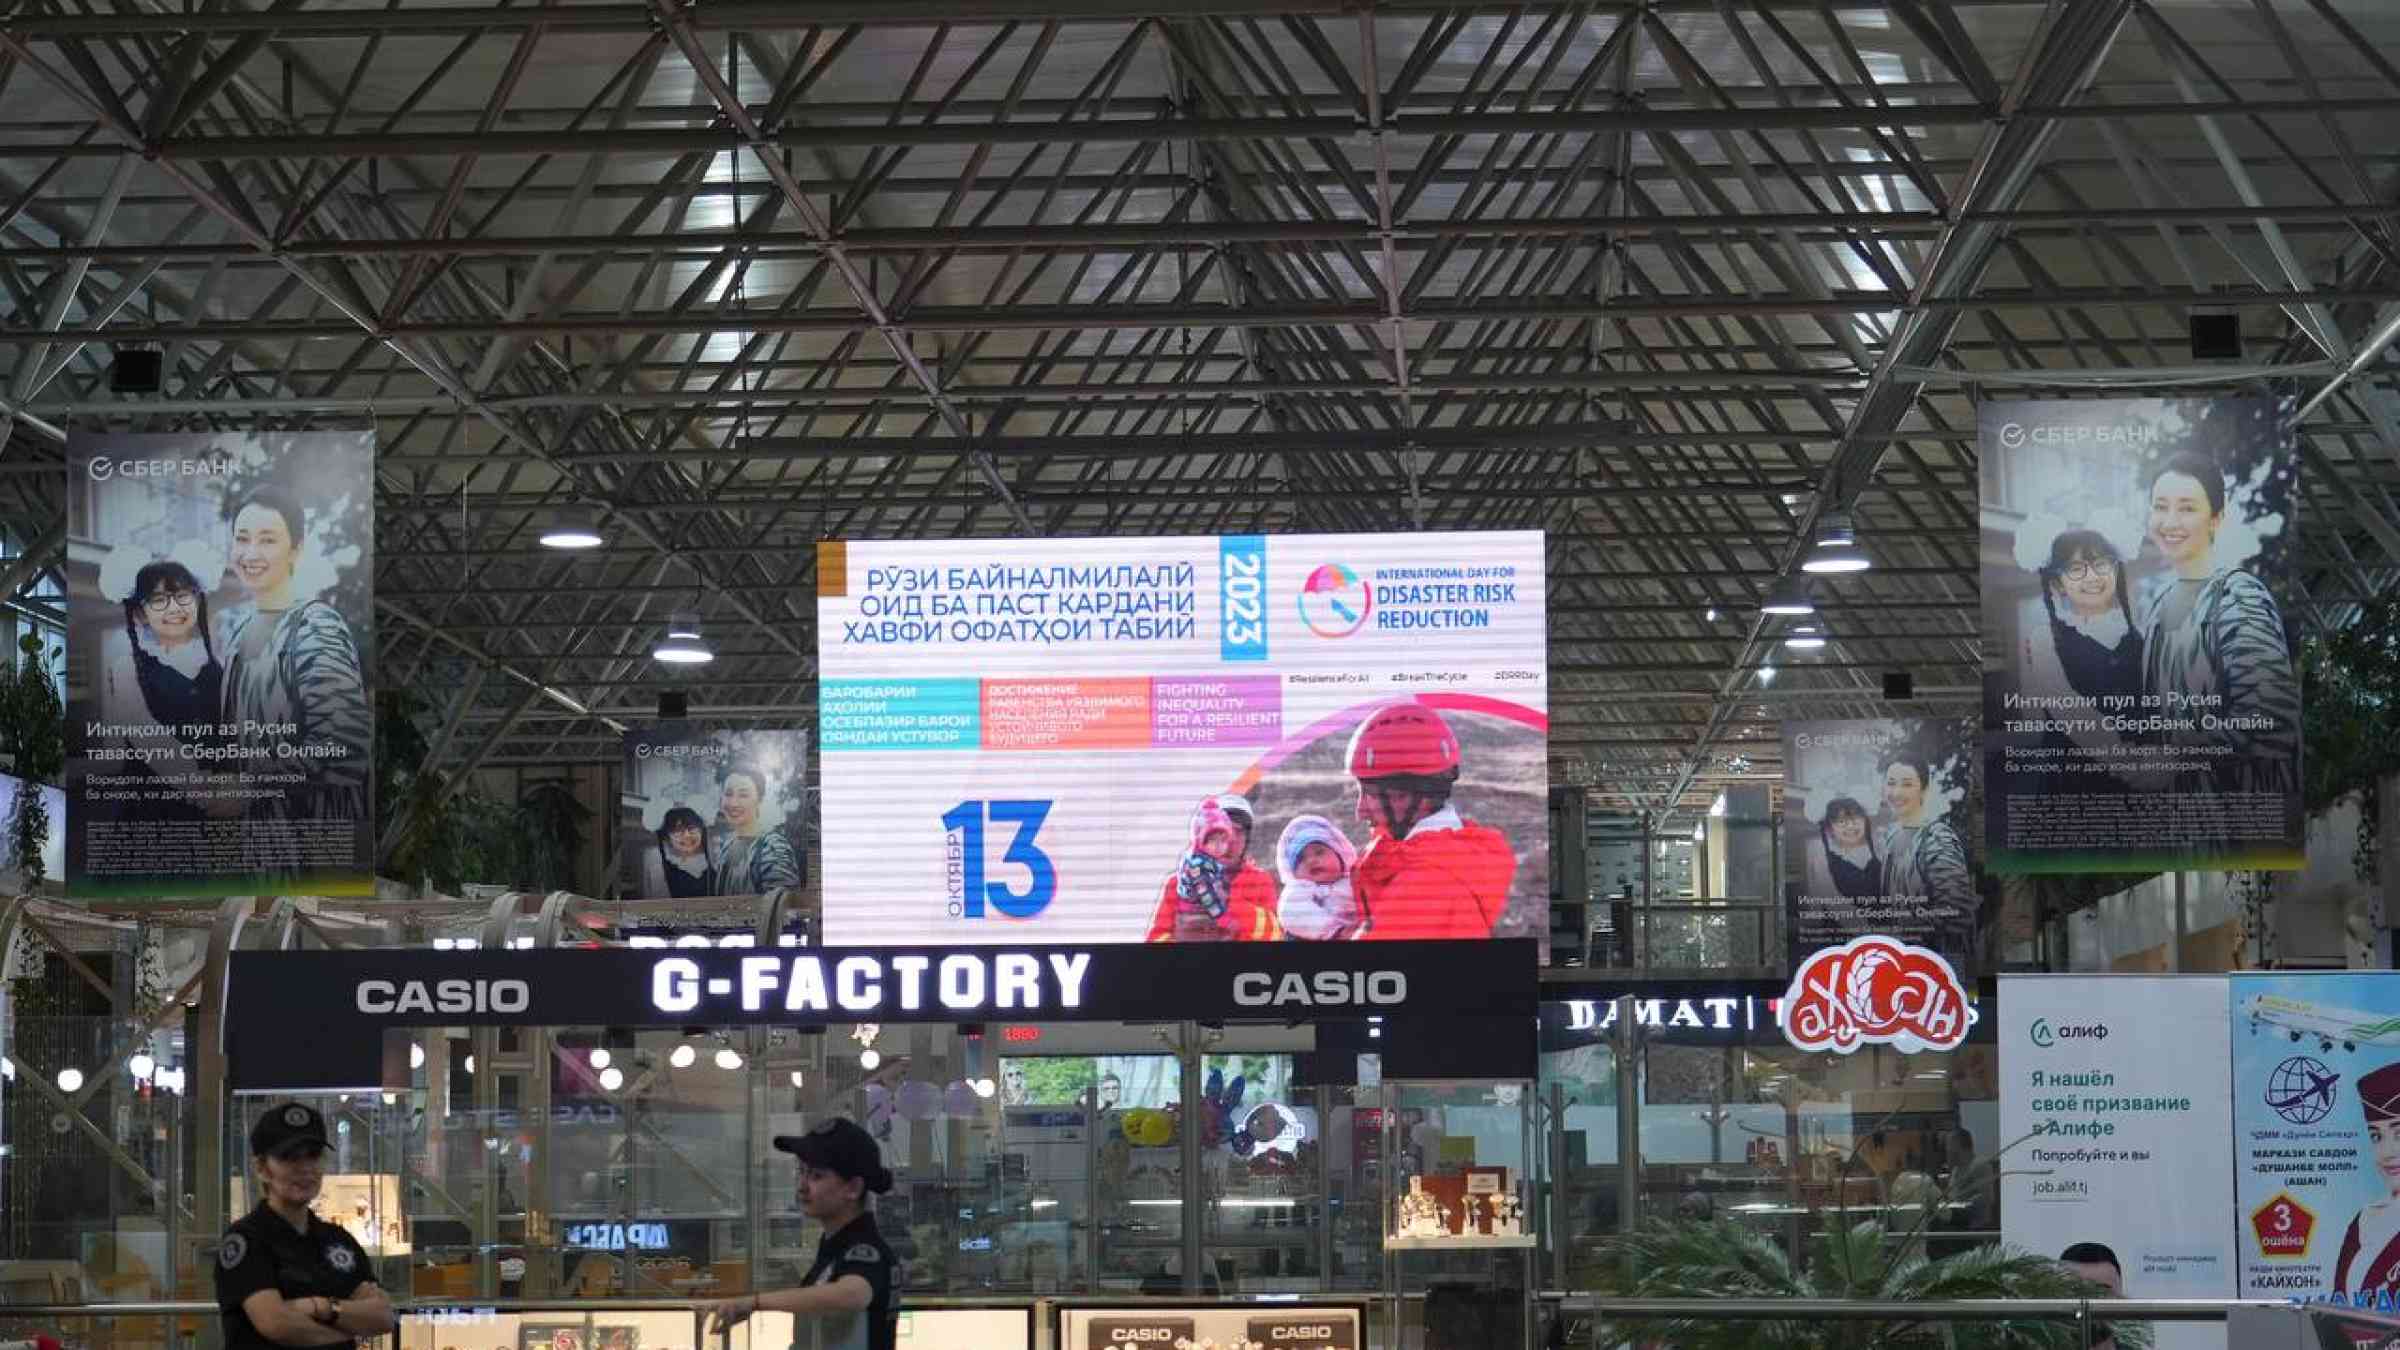 LED displays with IDDRR messages in a shopping centre in Dushanbe, Tajikistan